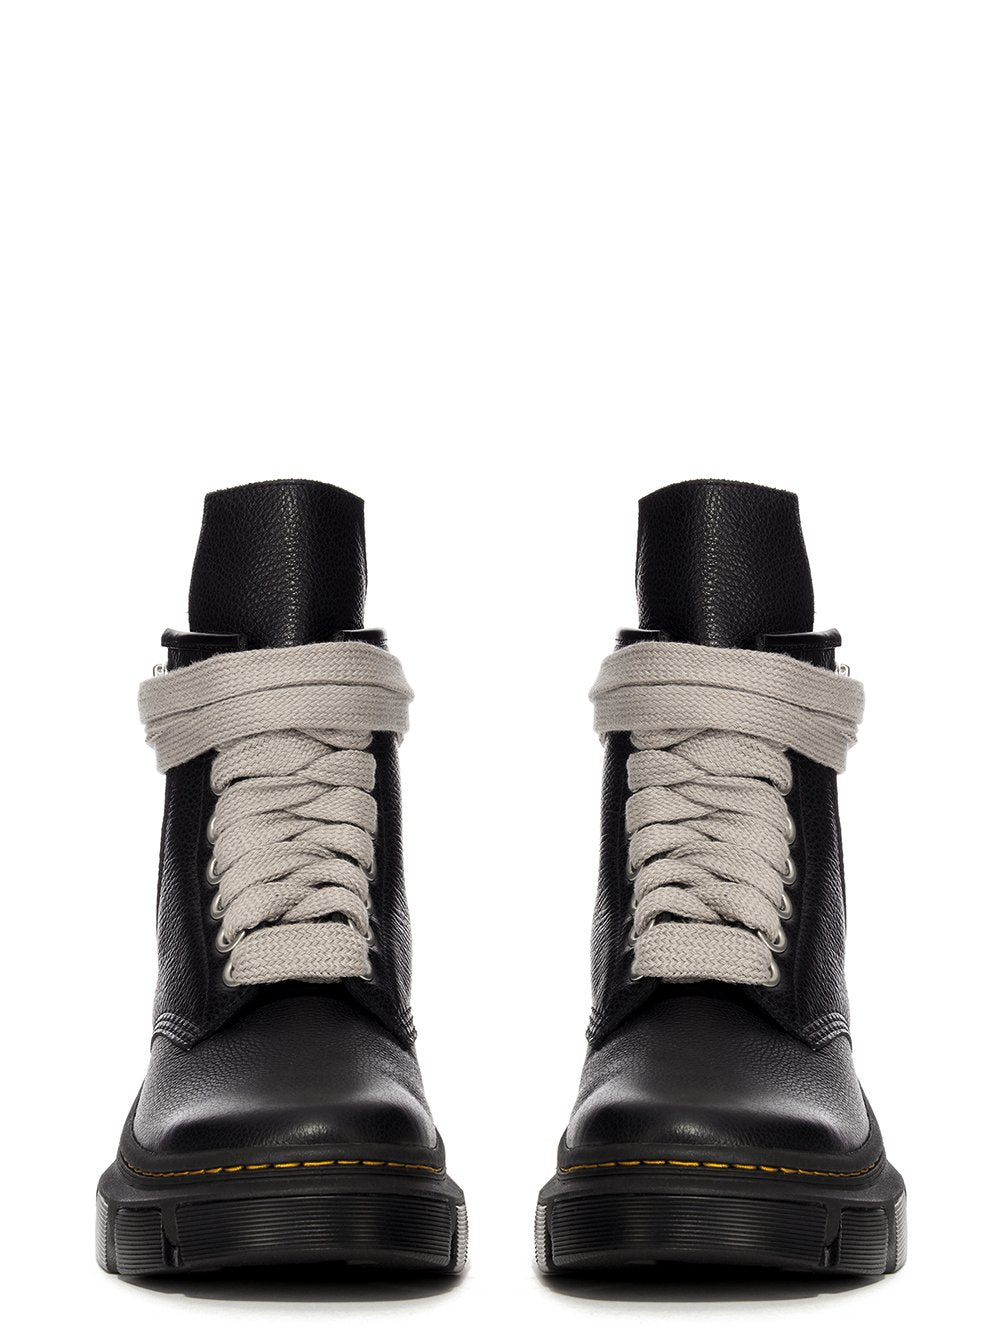 Dr. Martens x Rick Owens 1460 DMXL Jumbo Lace Boot in Black Cow Leather